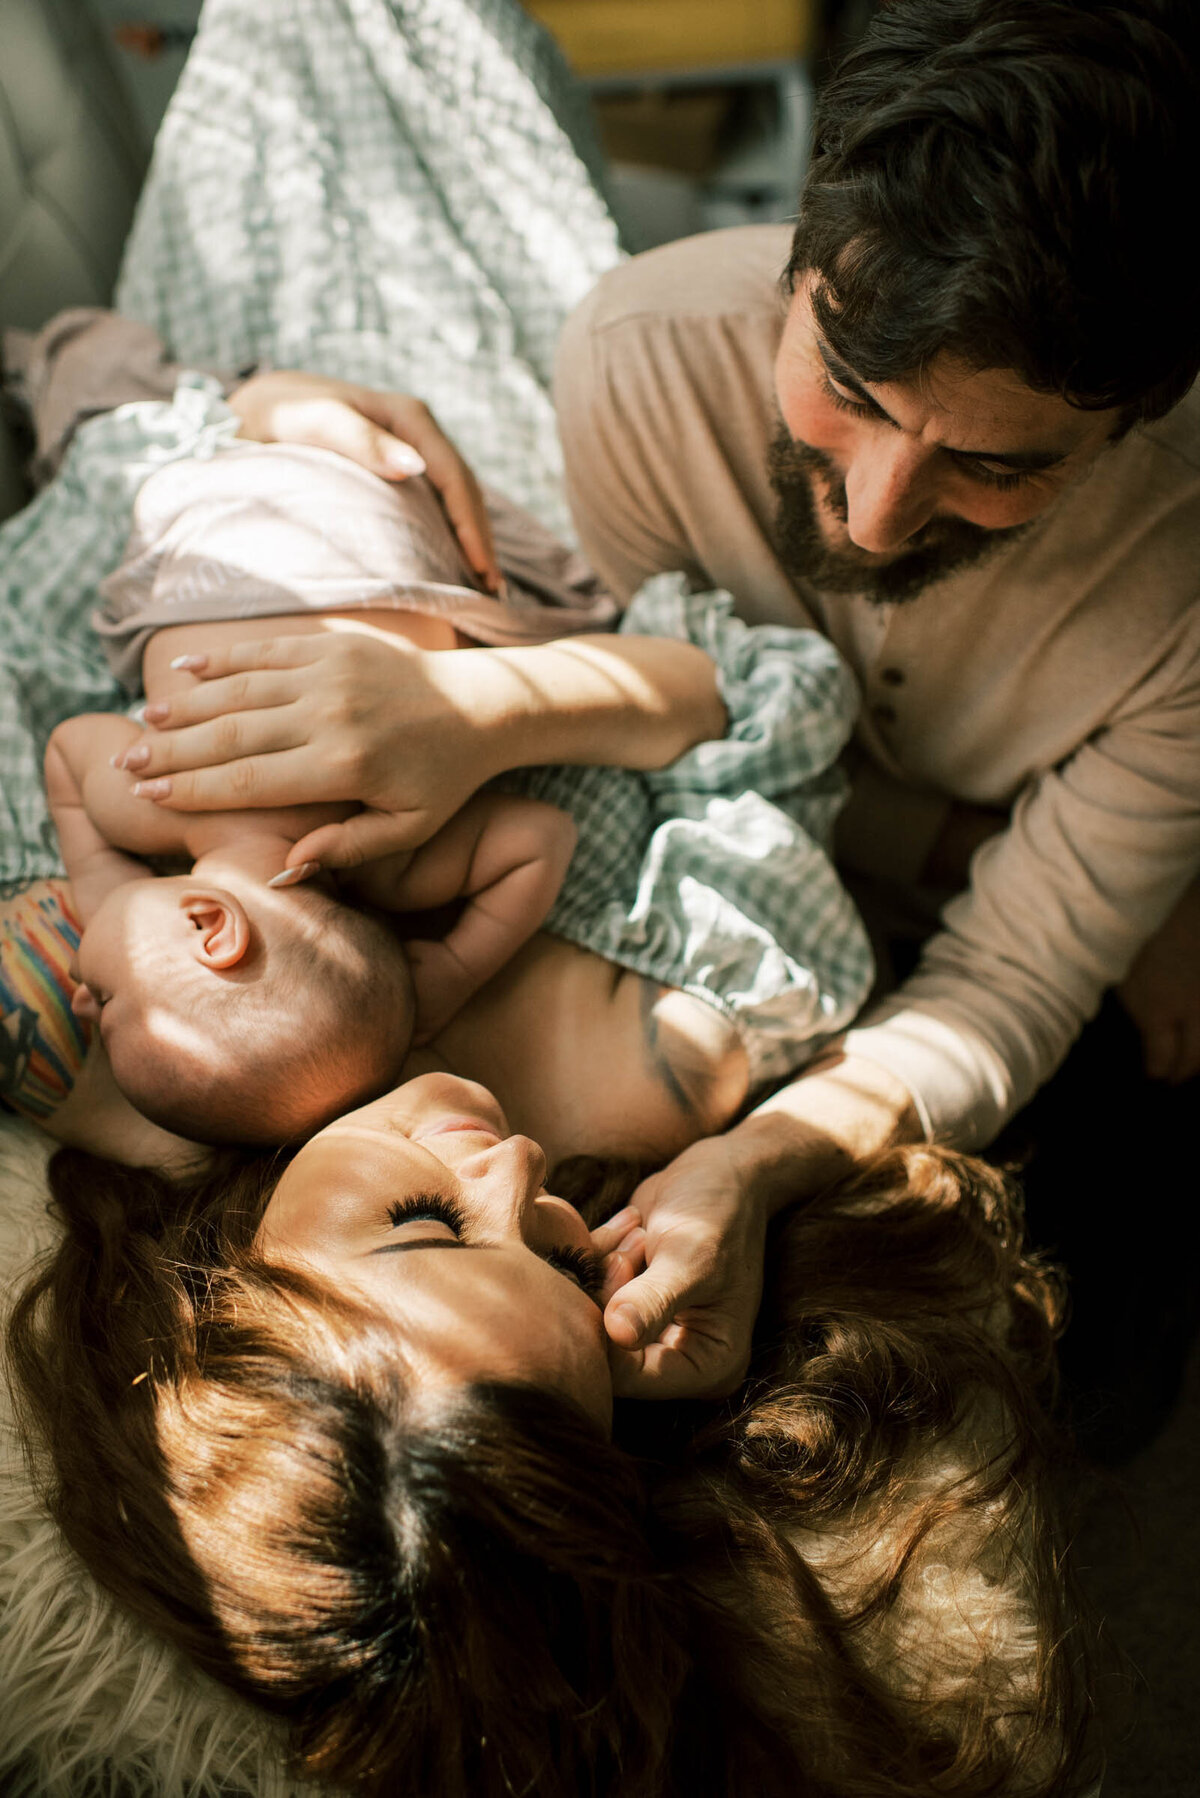 Mother and father lying with newborn baby by the window